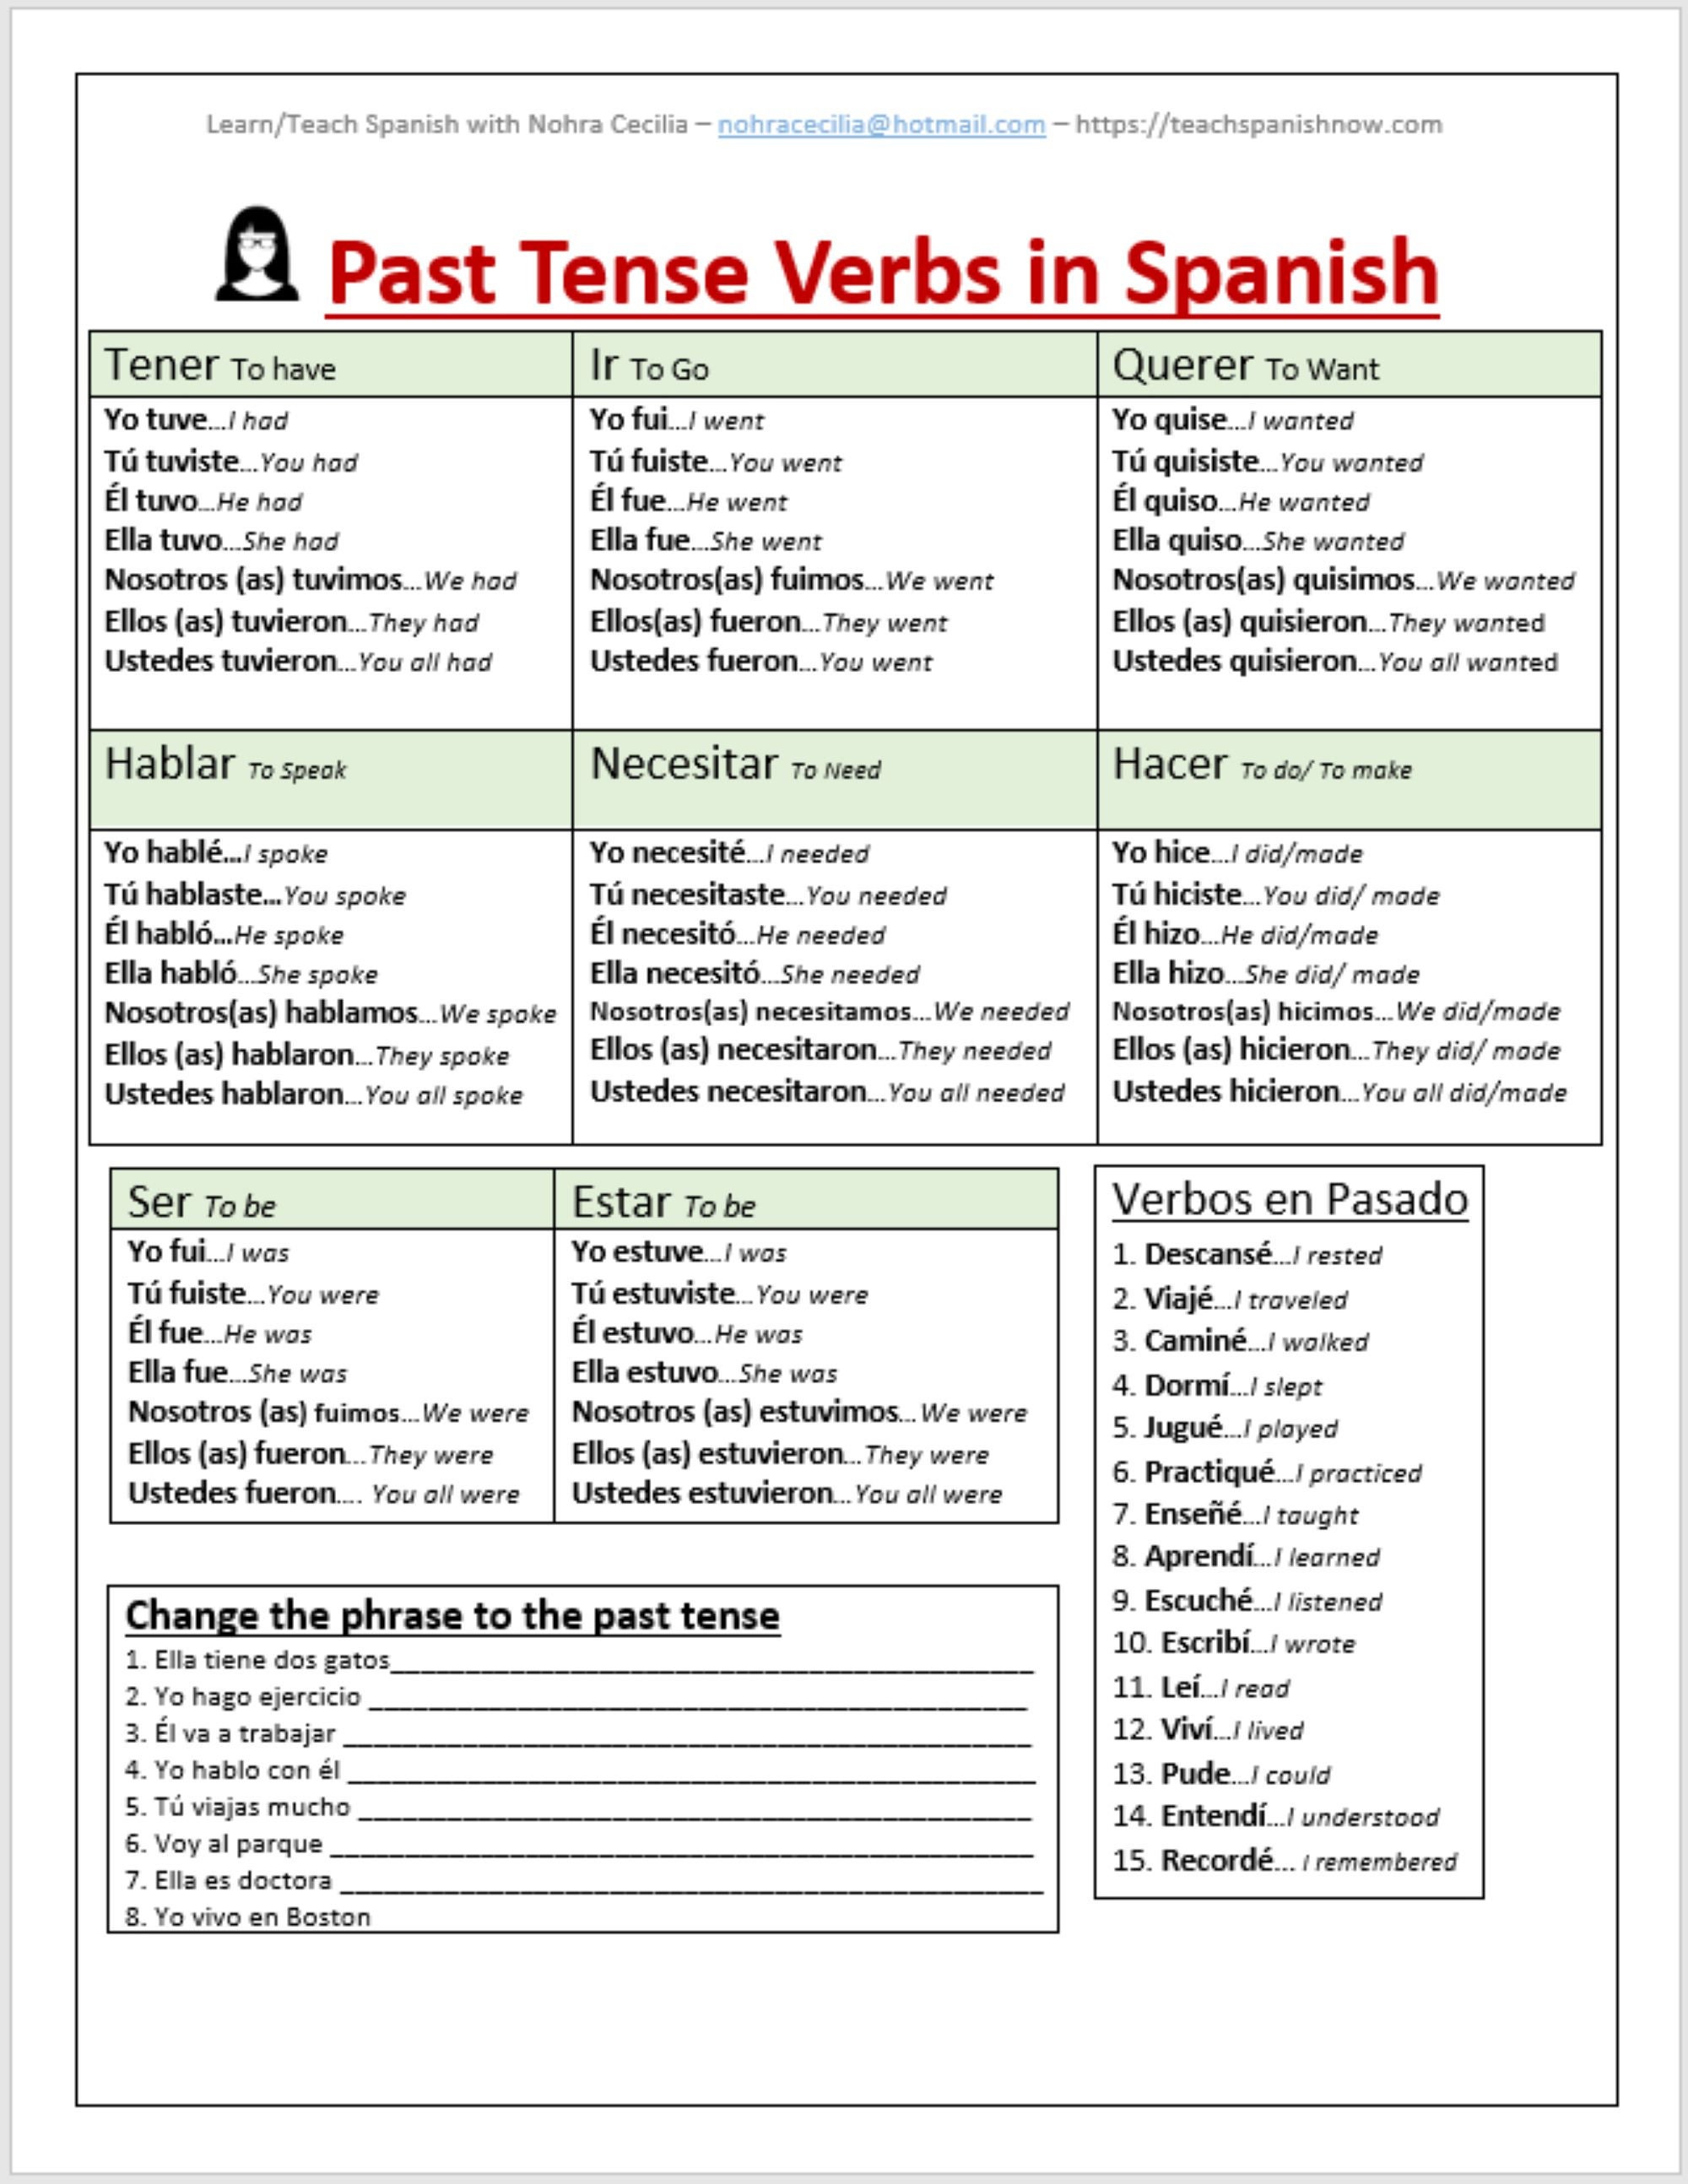 How To Make Verbs Past Tense In Spanish